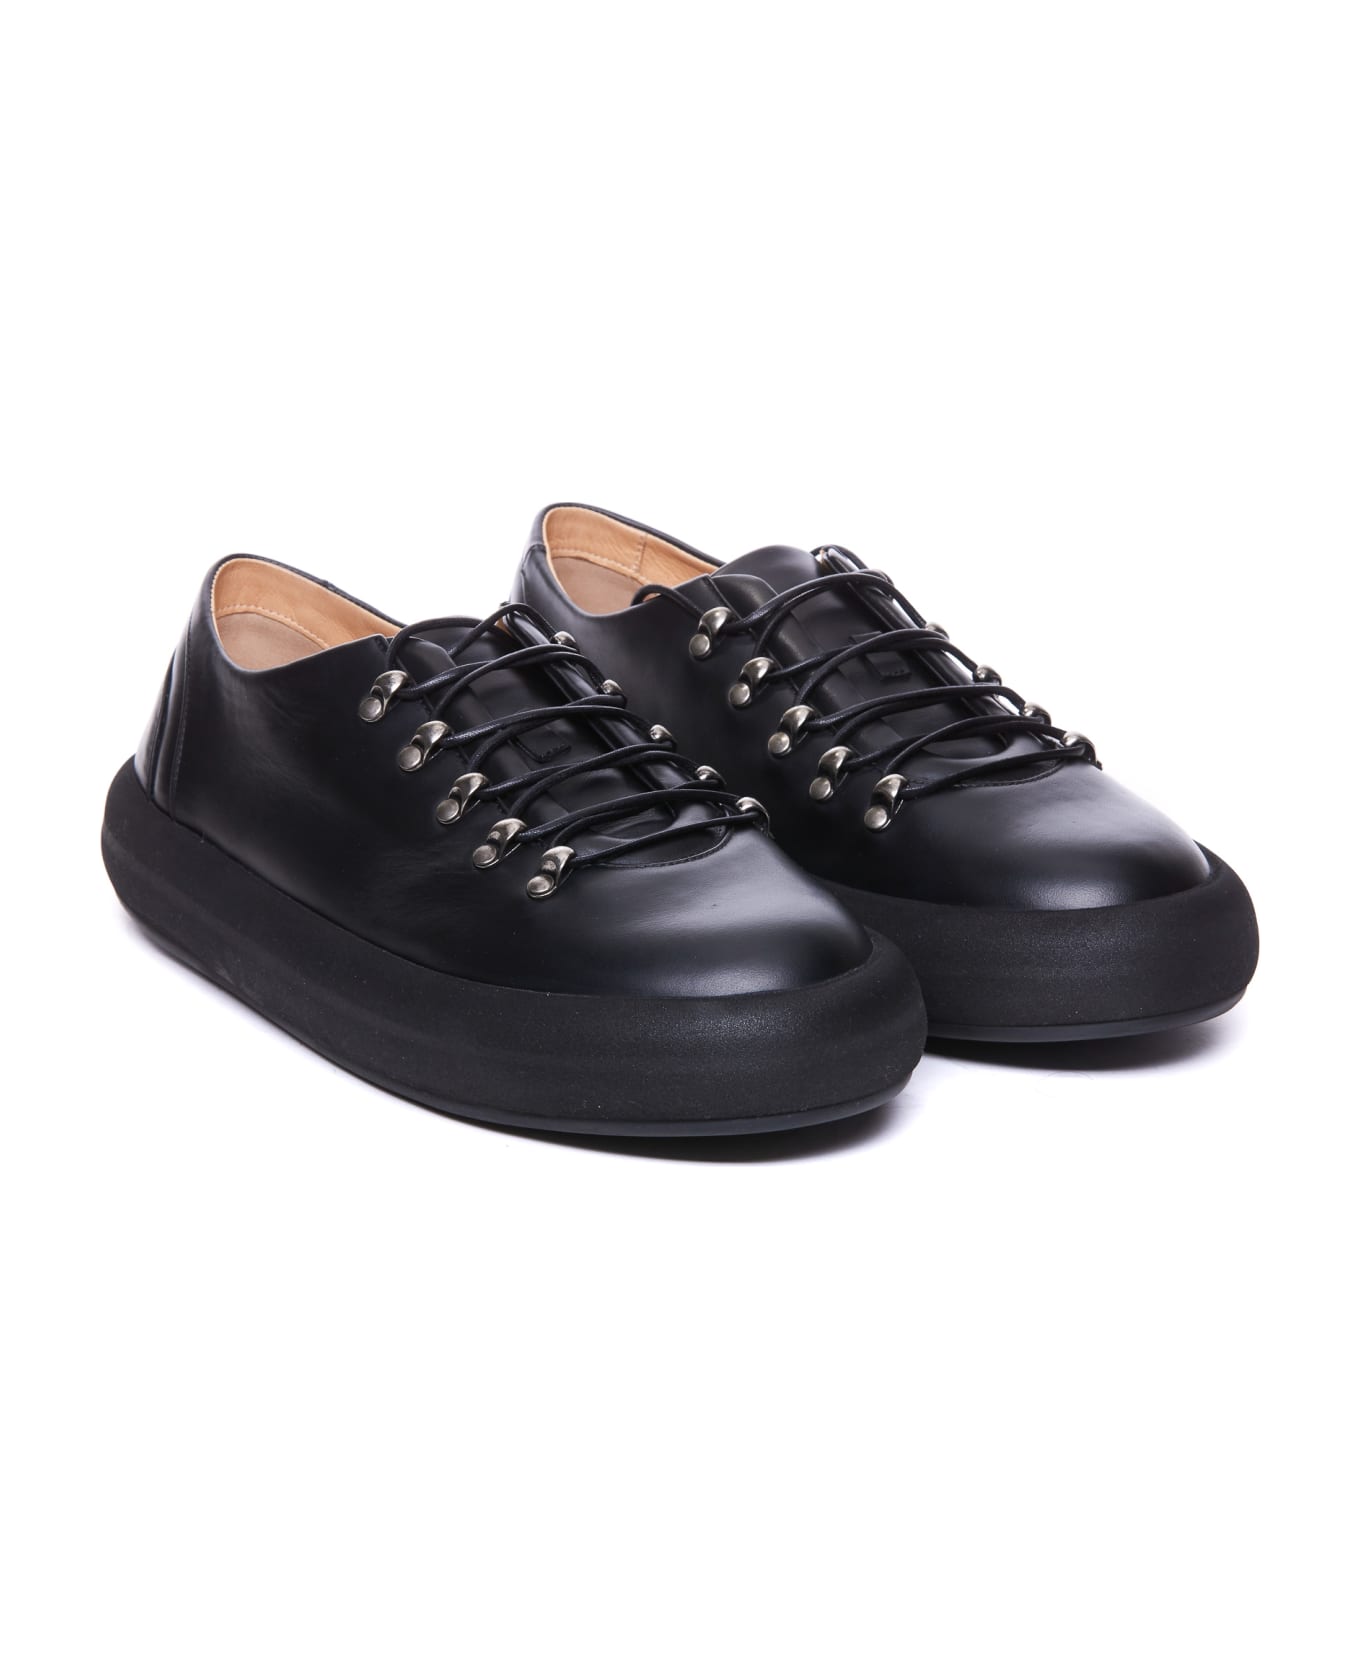 Marsell Espana Lace Up Shoes - Black